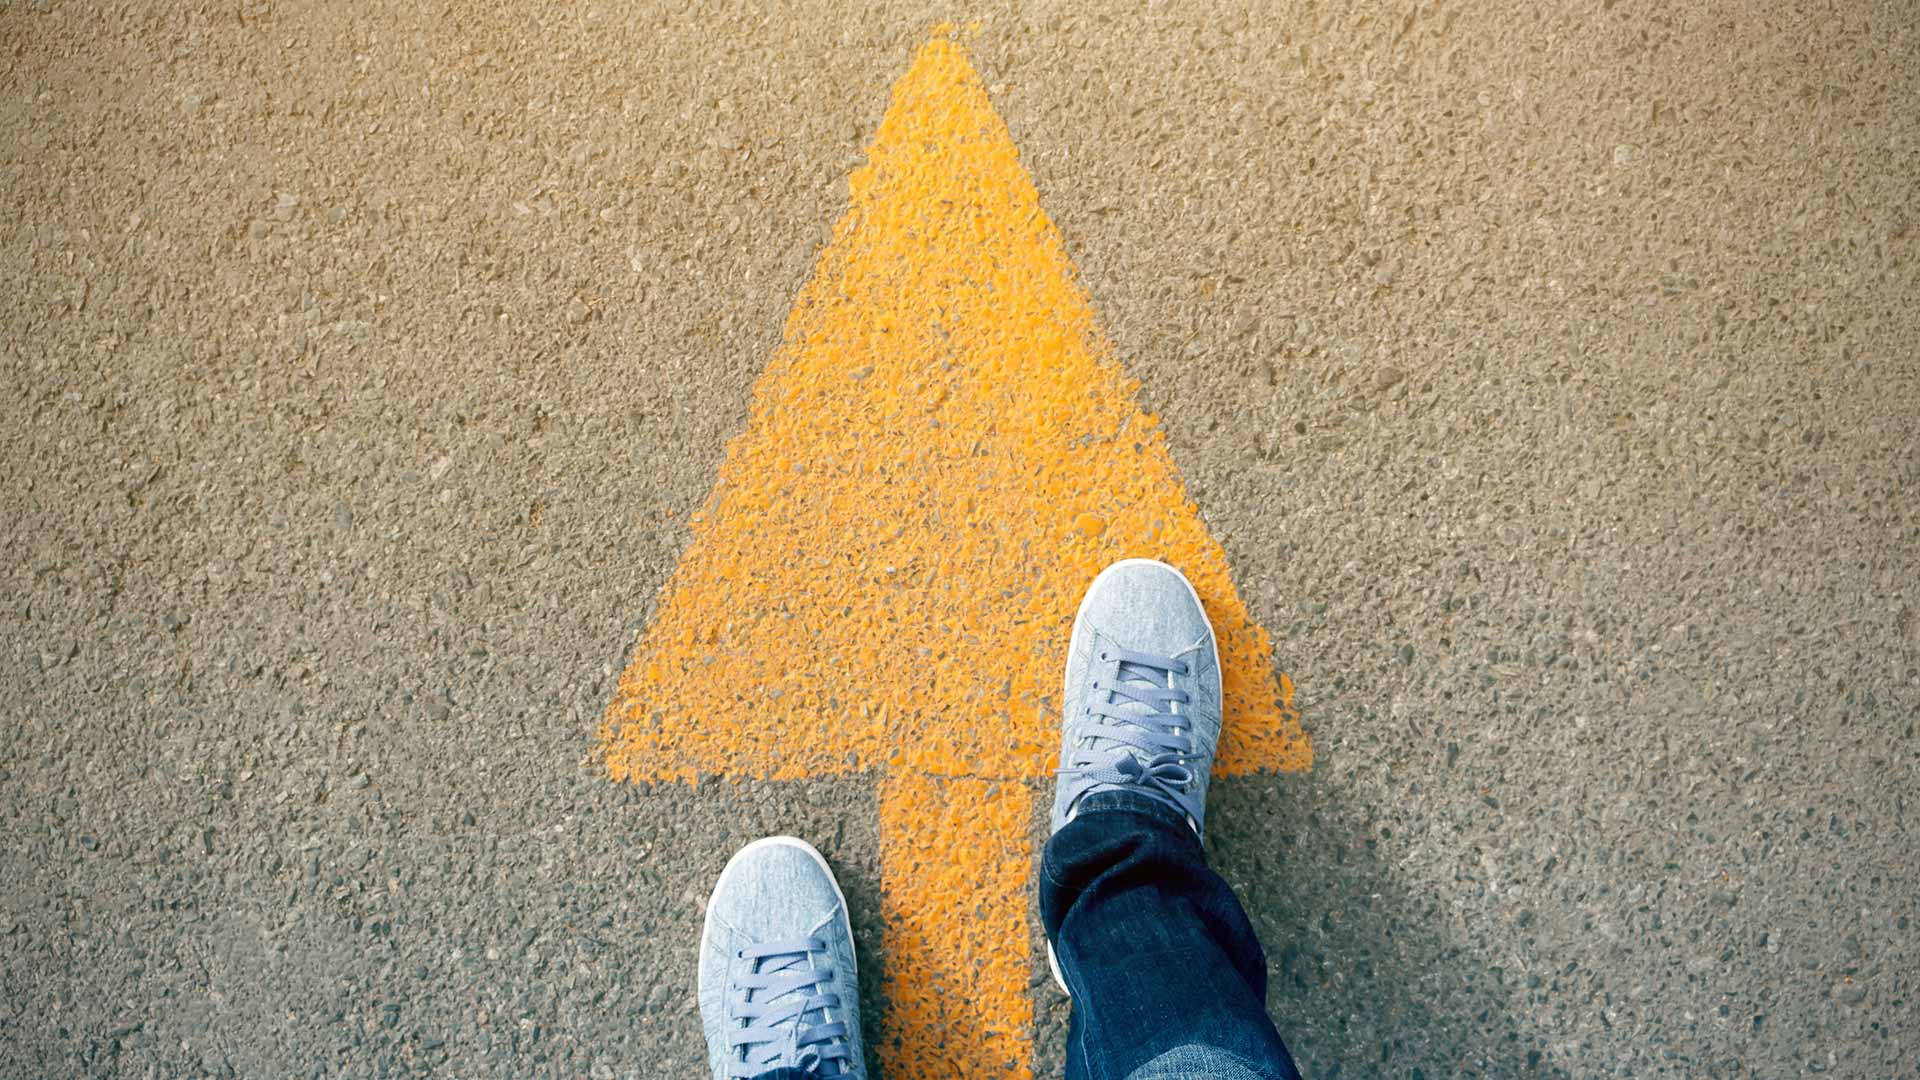 Person standing on a yellow arrow painted on the ground, moving forward